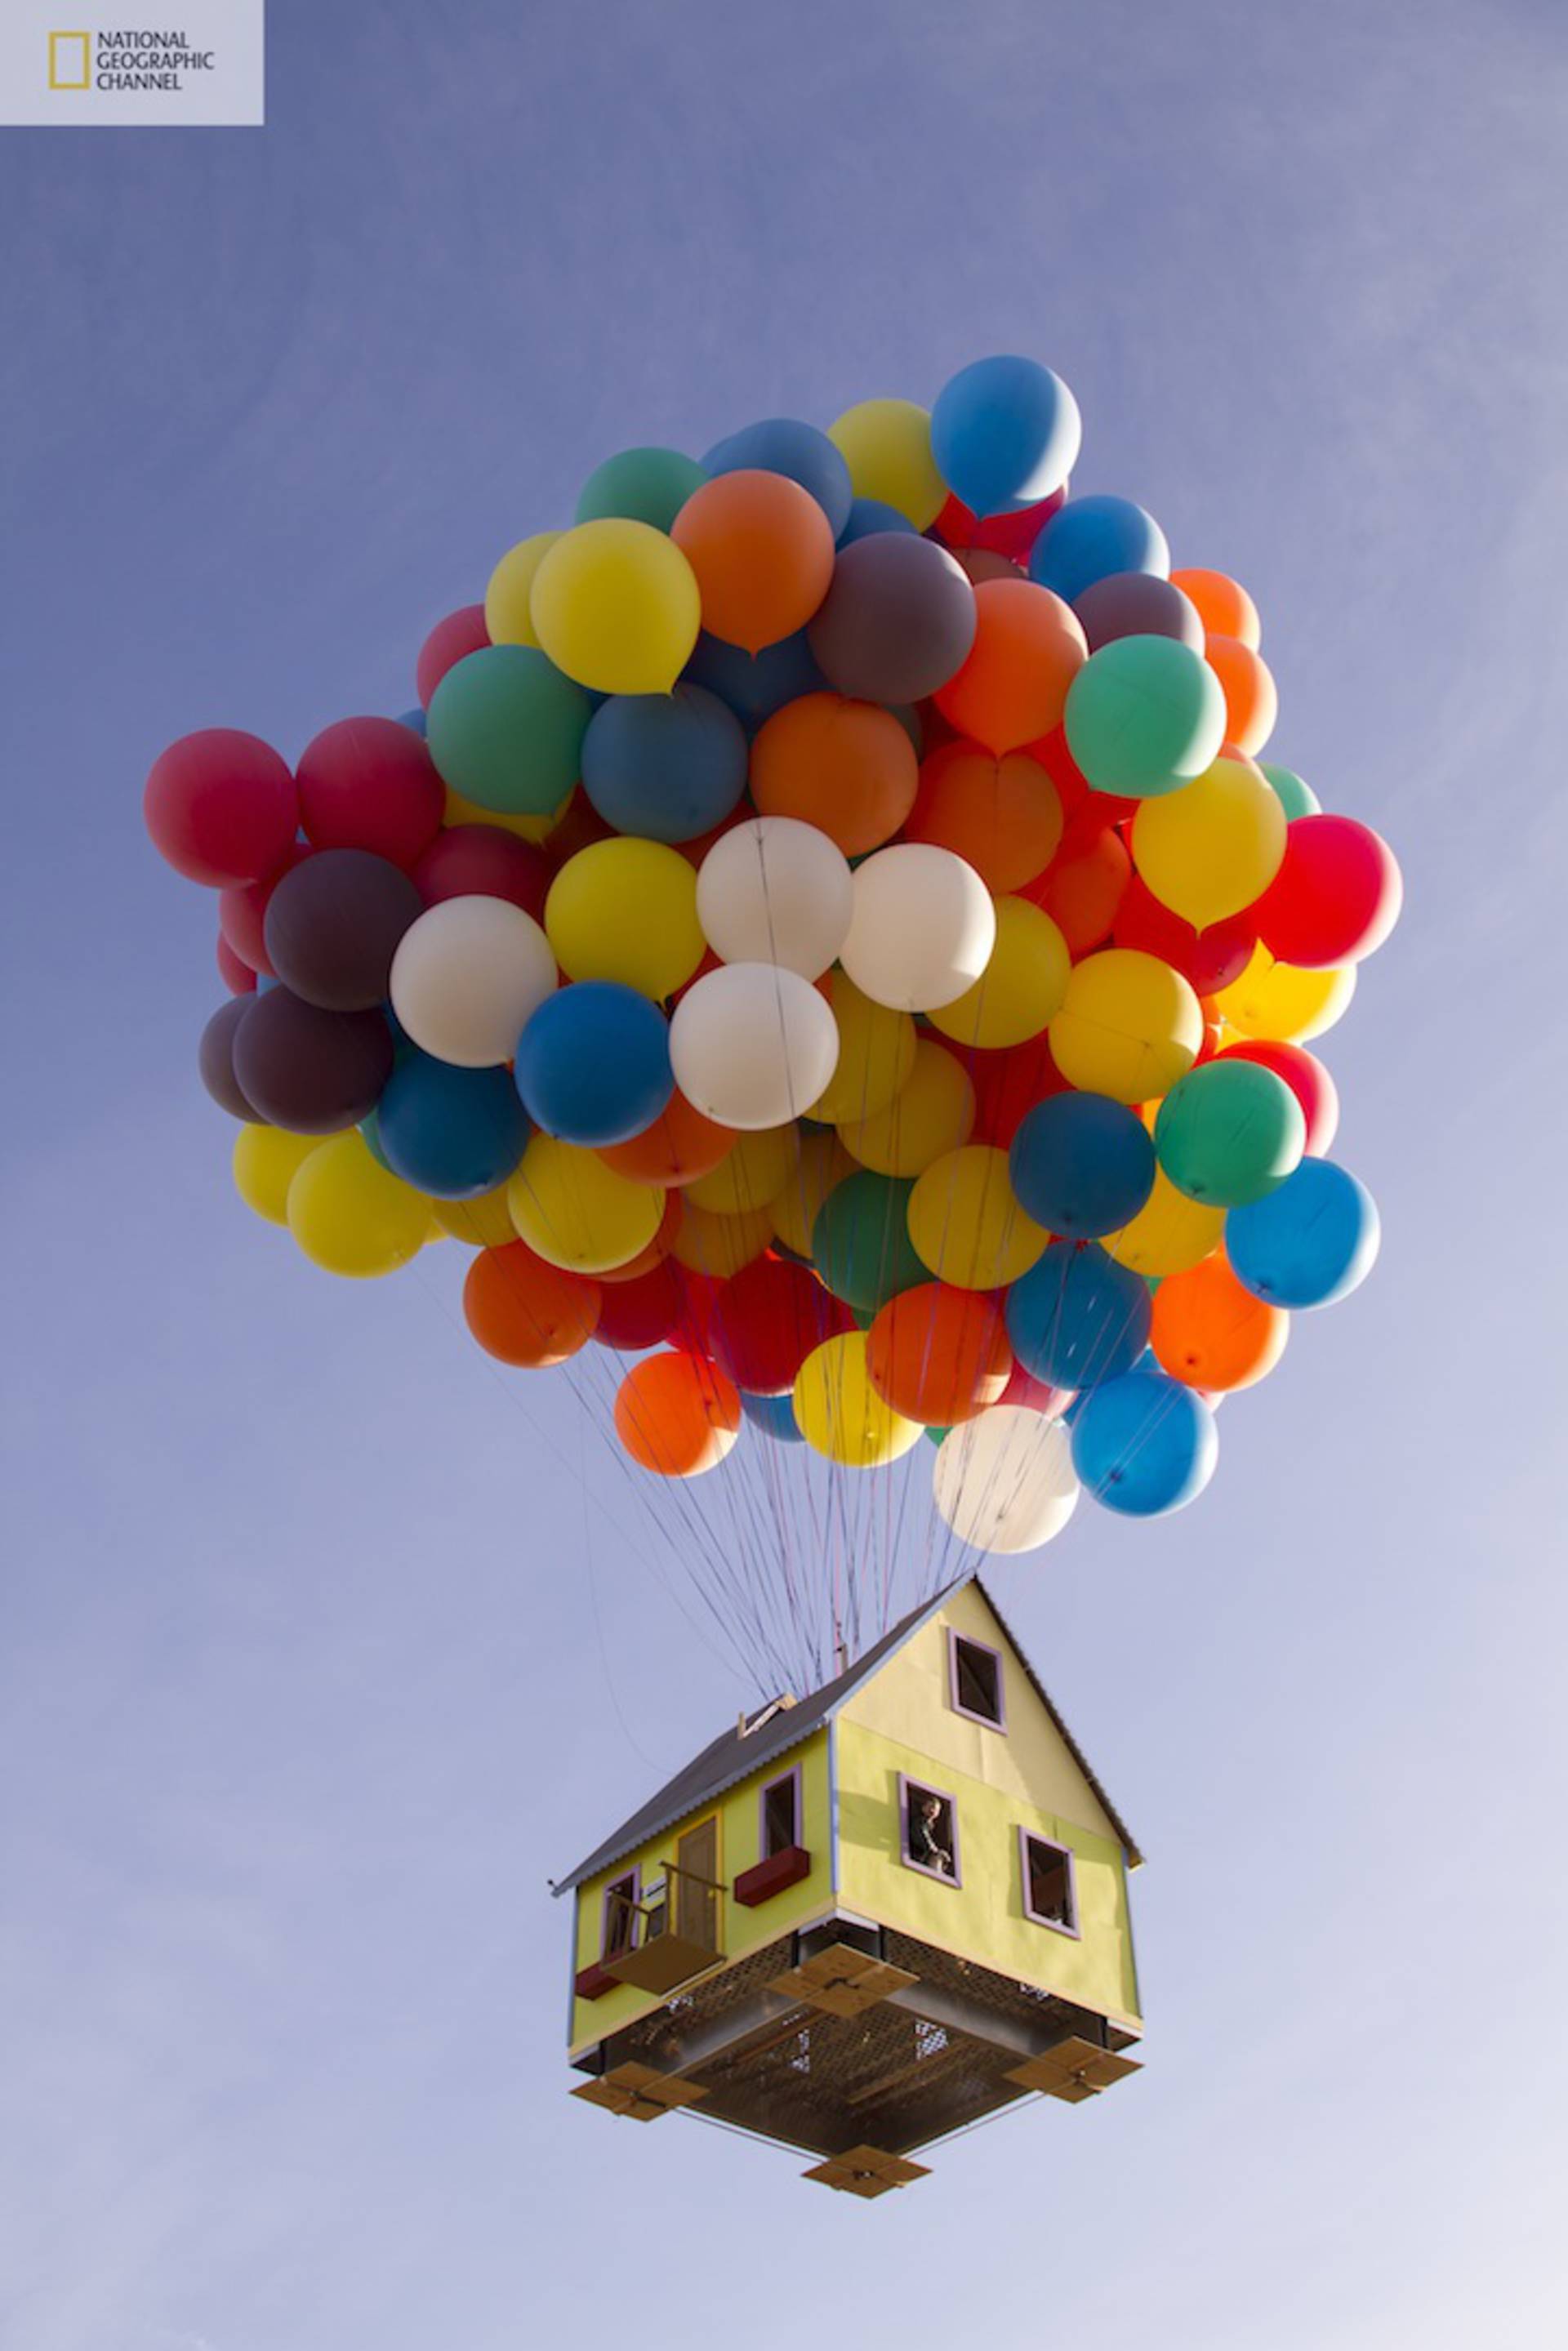 Flying House Inspired by Up Movie - Home Reviews